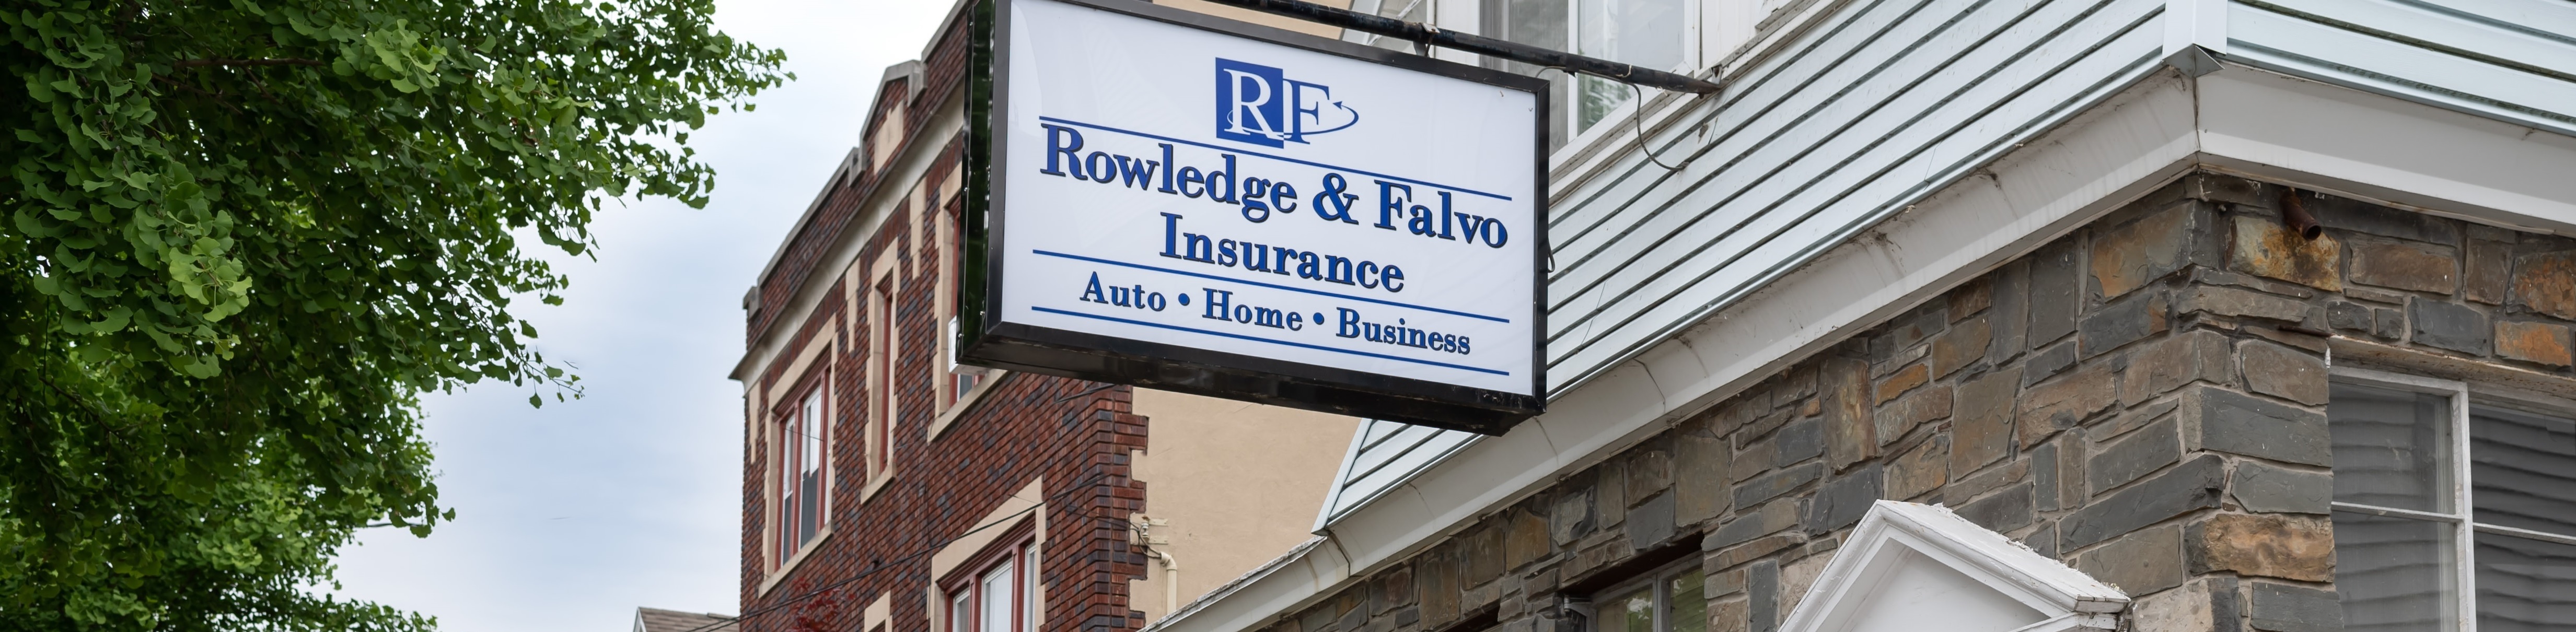 New York Auto owners with Auto insurance coverage